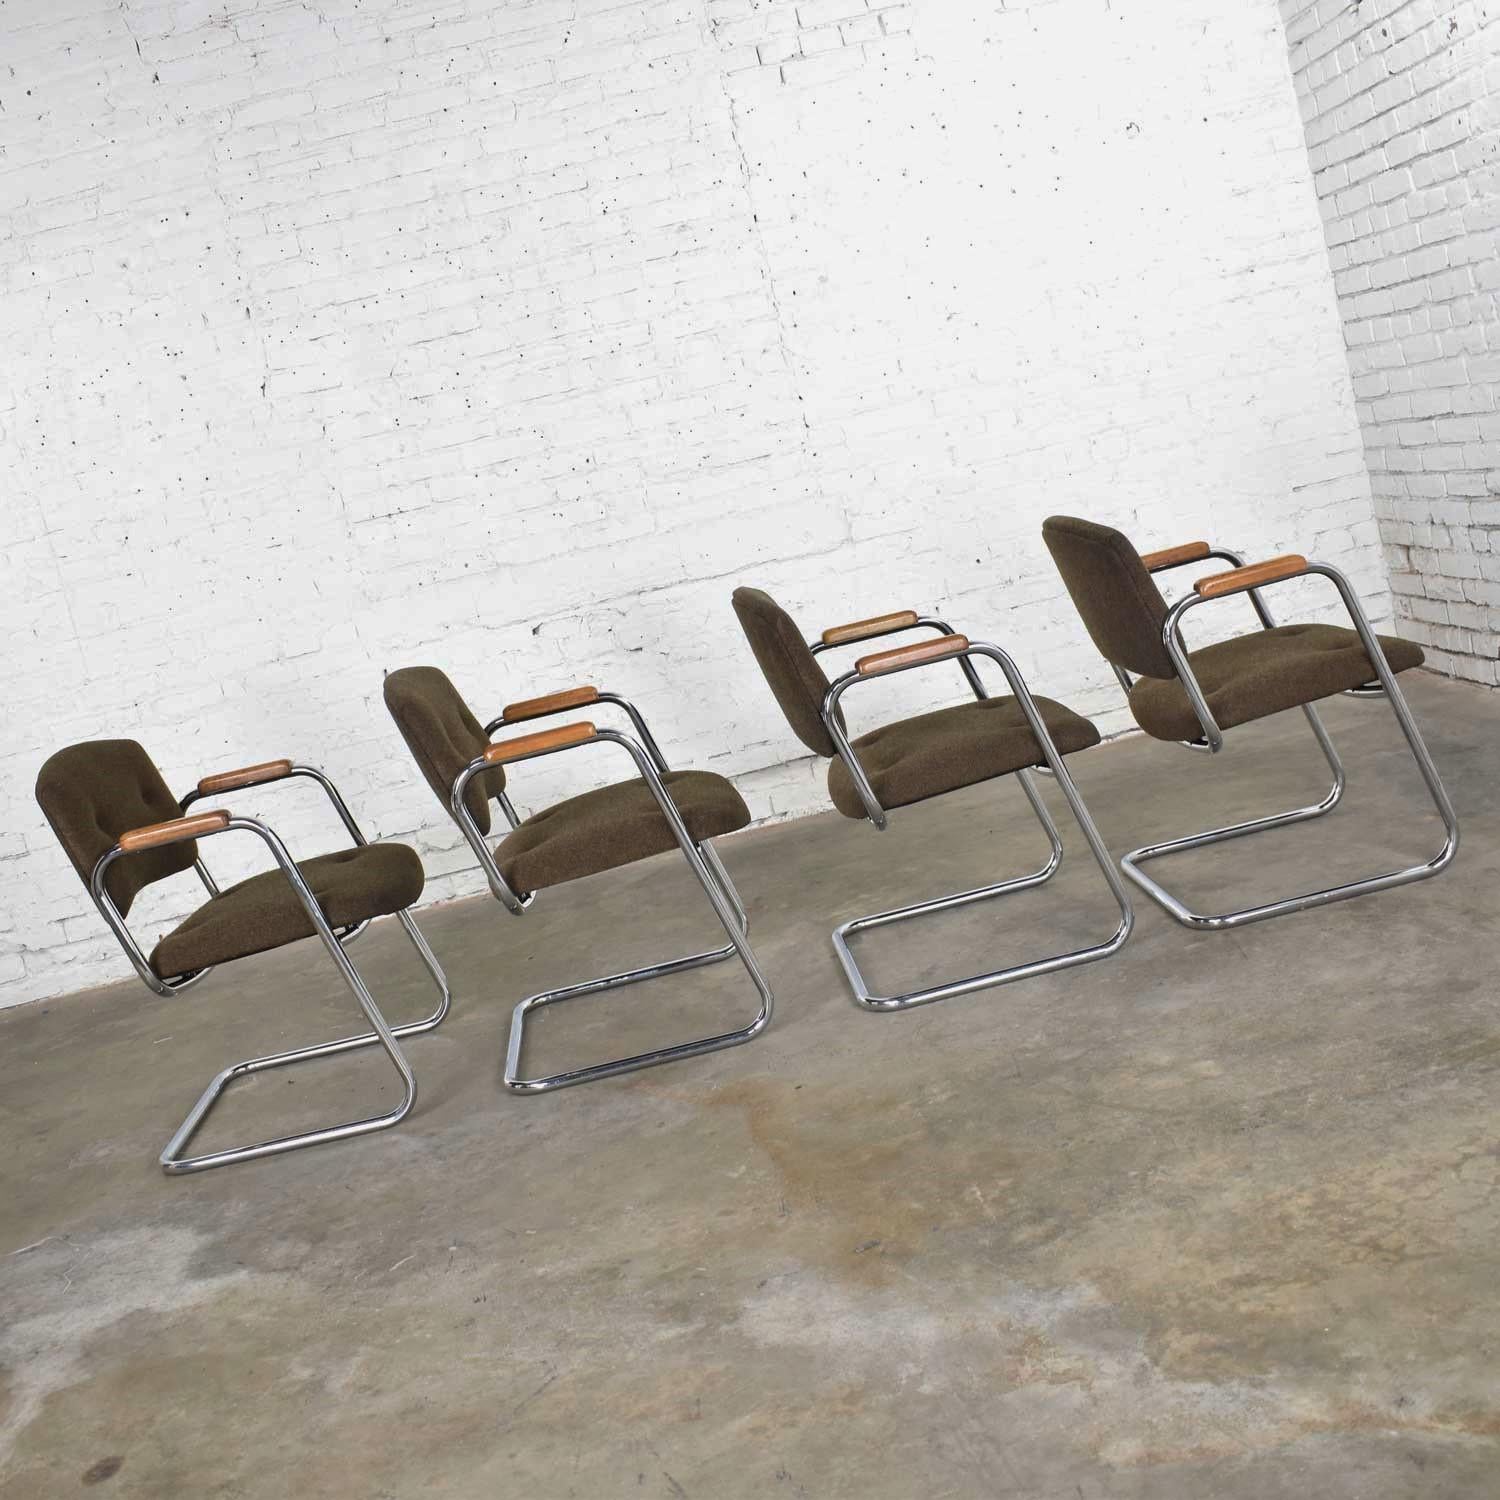 American 4 Cantilever Armchairs Chrome Brown w/ Wood Arms Style of Steelcase or Pollock